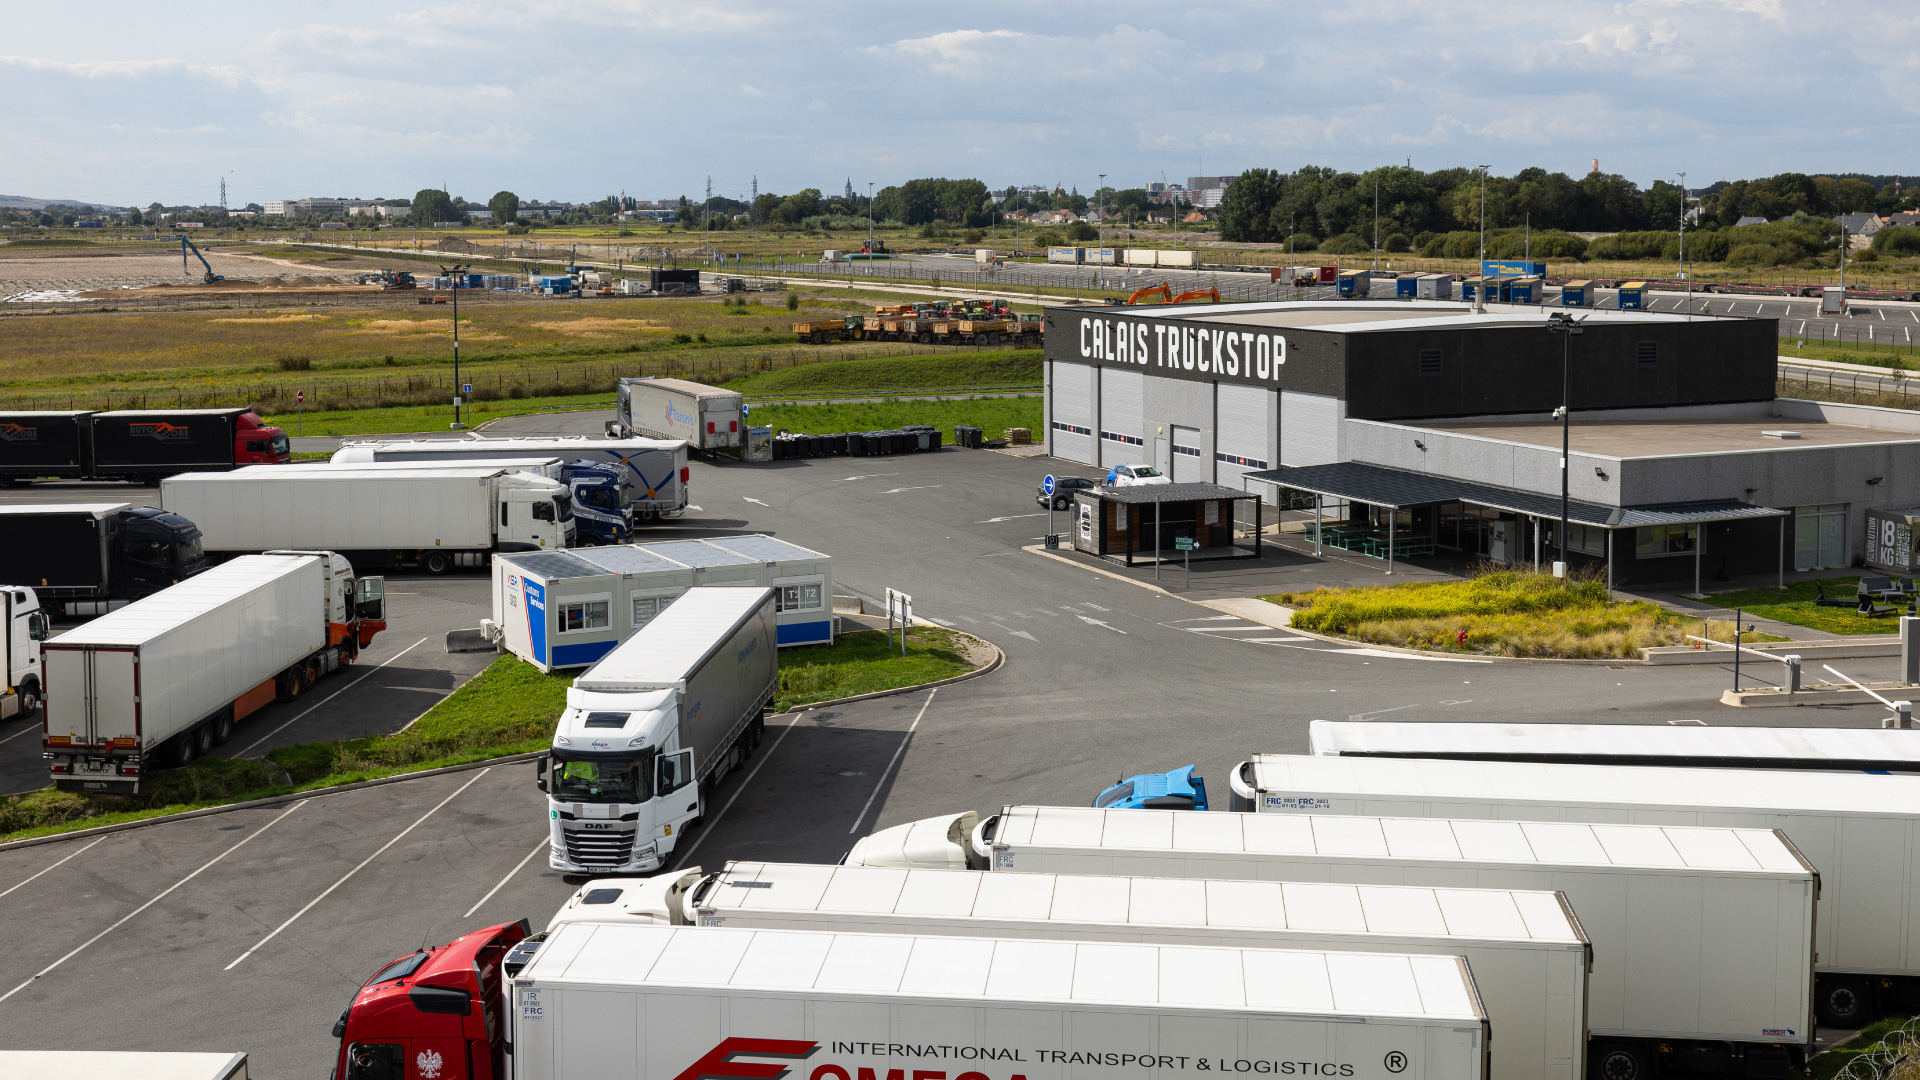 Calais TruckStop, secure HGV parking and services for drivers